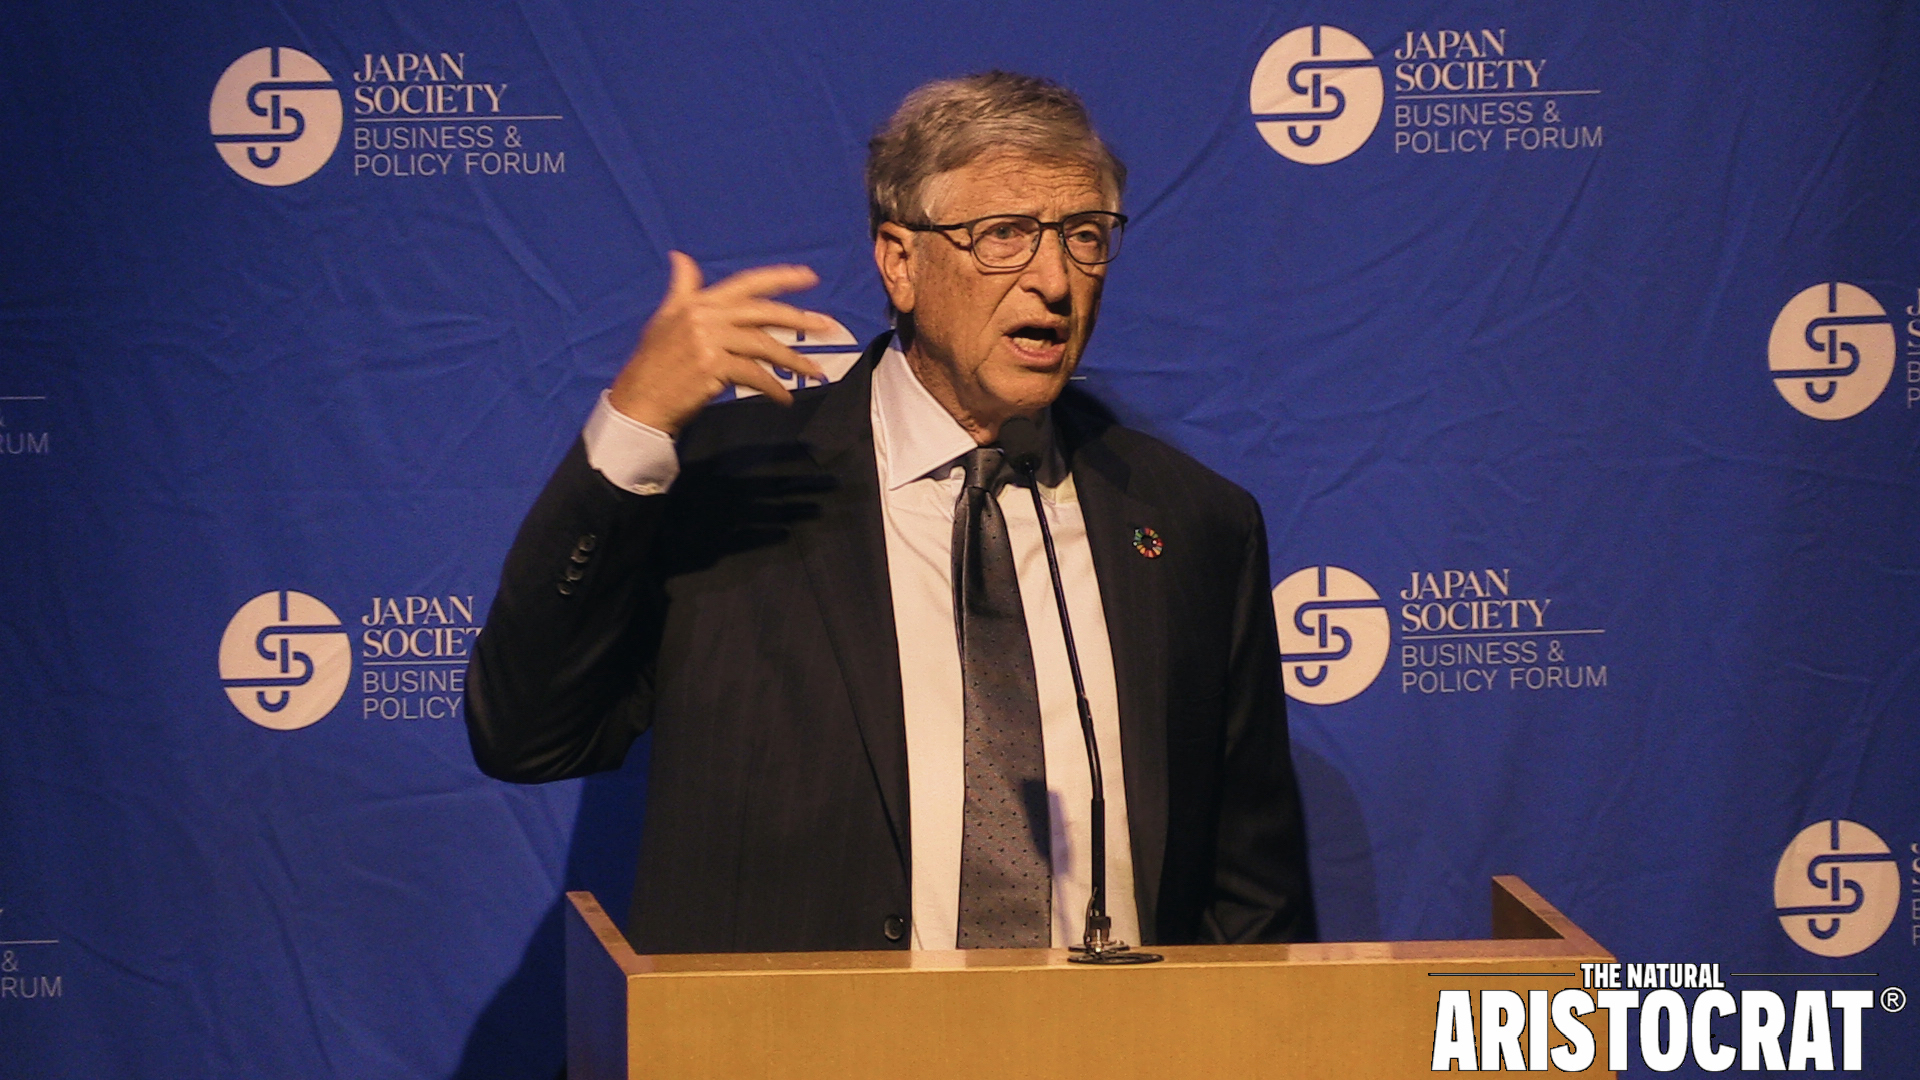 Microsoft co-founder Bill Gates speaking at Japan Society in NYC on 9/21/23. Photo Credit: Nir Regev - The Natural Aristocrat®